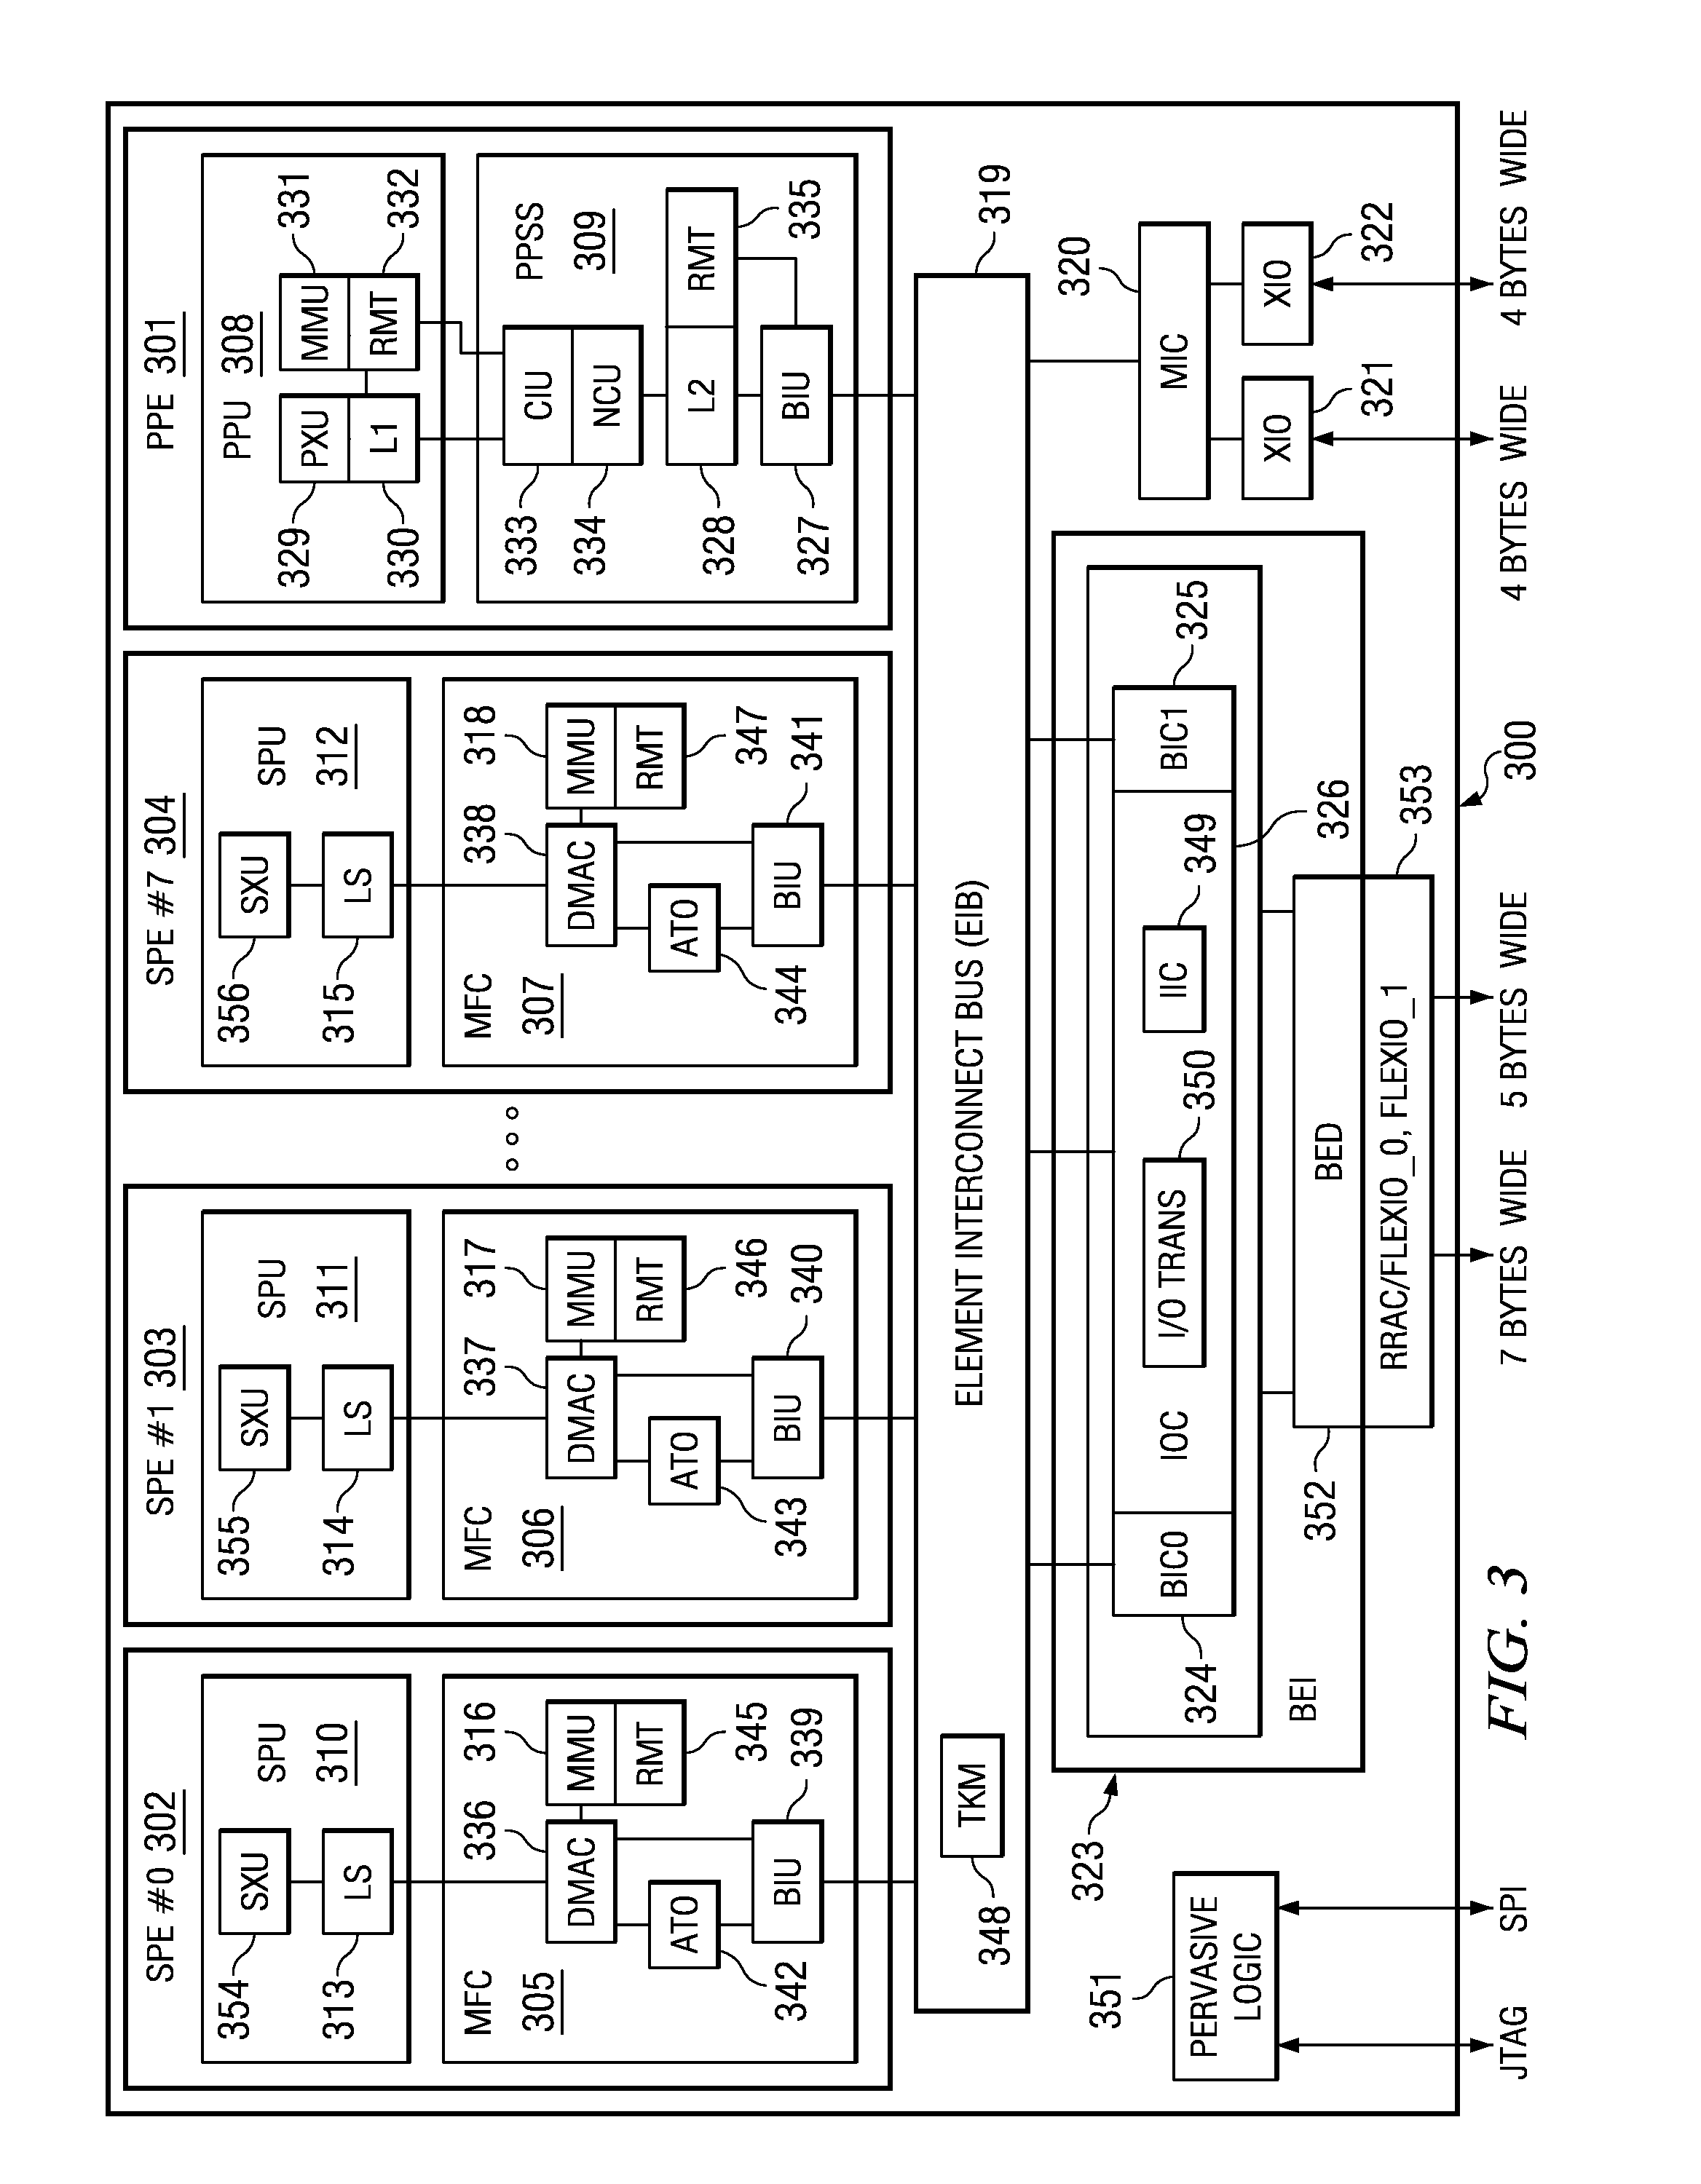 Selection of processor cores for optimal thermal performance